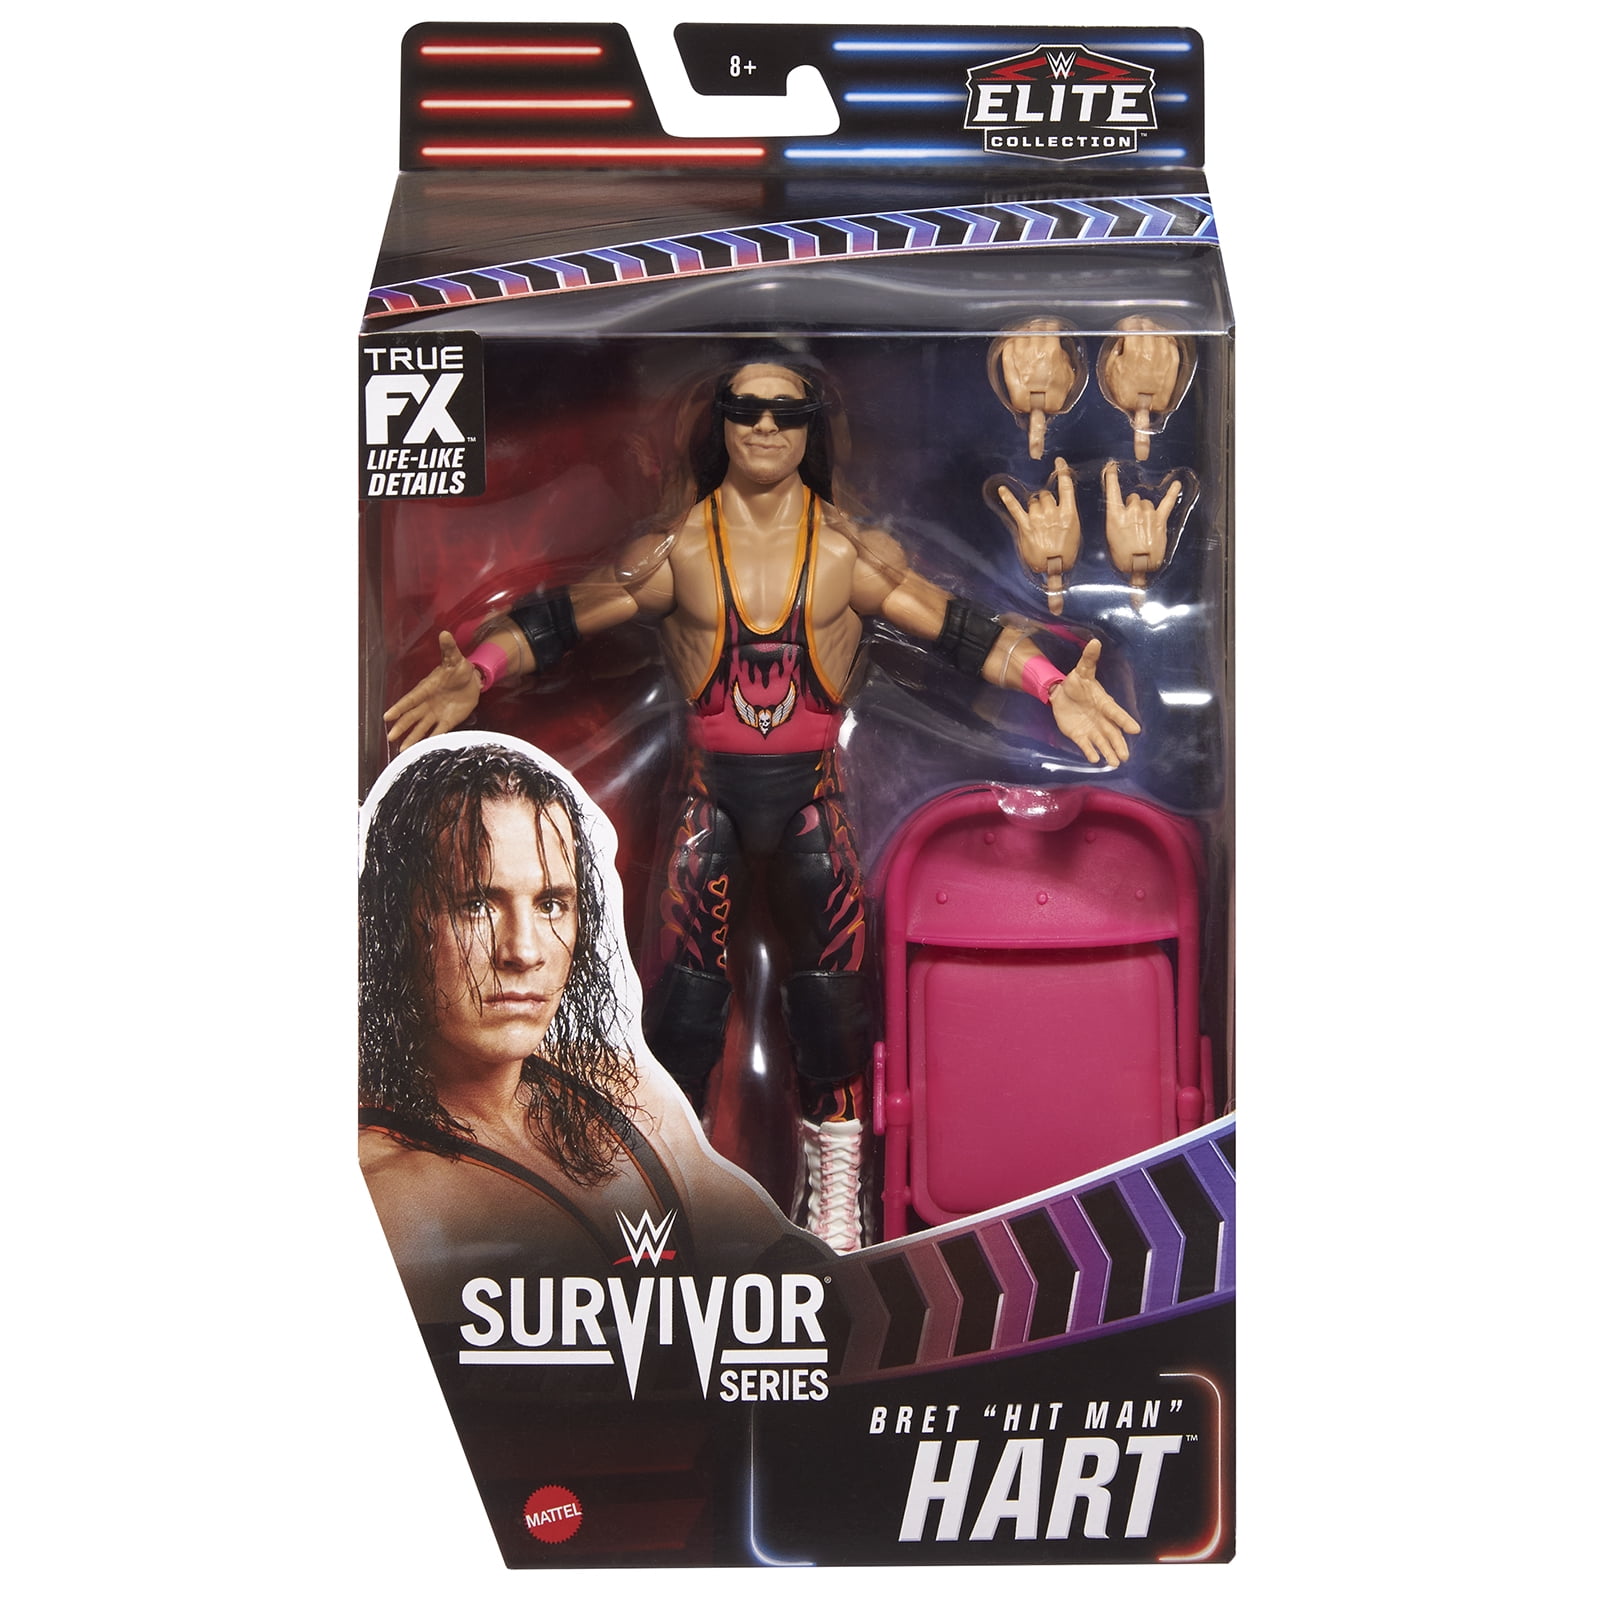 Bret Hitman Hart Ultimate Edition WWE Elite Action Figure Toy Brand New 